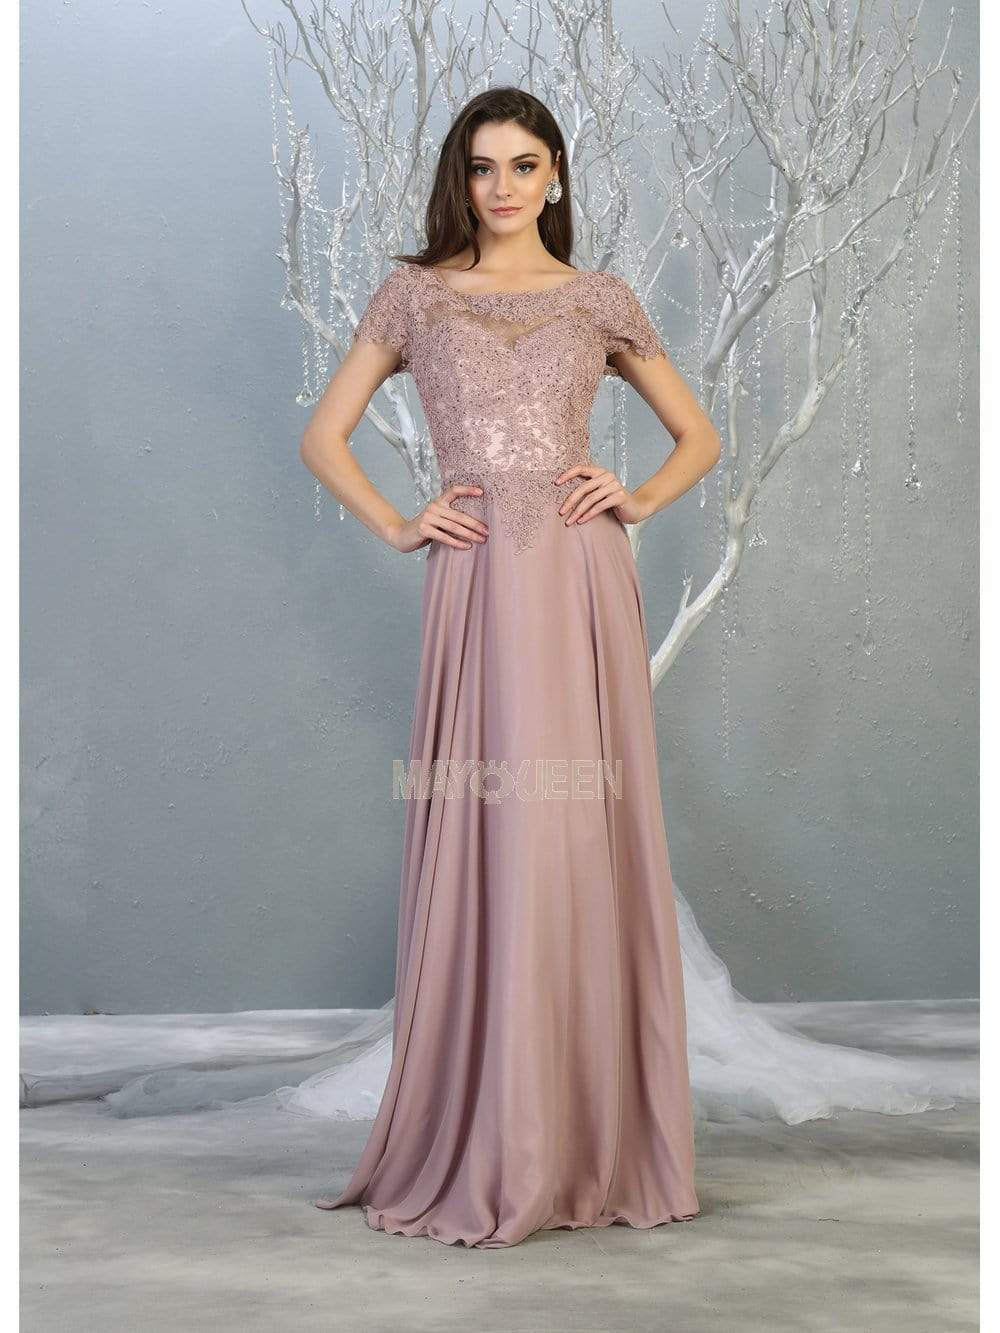 May Queen - MQ1763 Short Sleeve Jeweled Applique A-Line Dress Prom Dresses M / Mauve